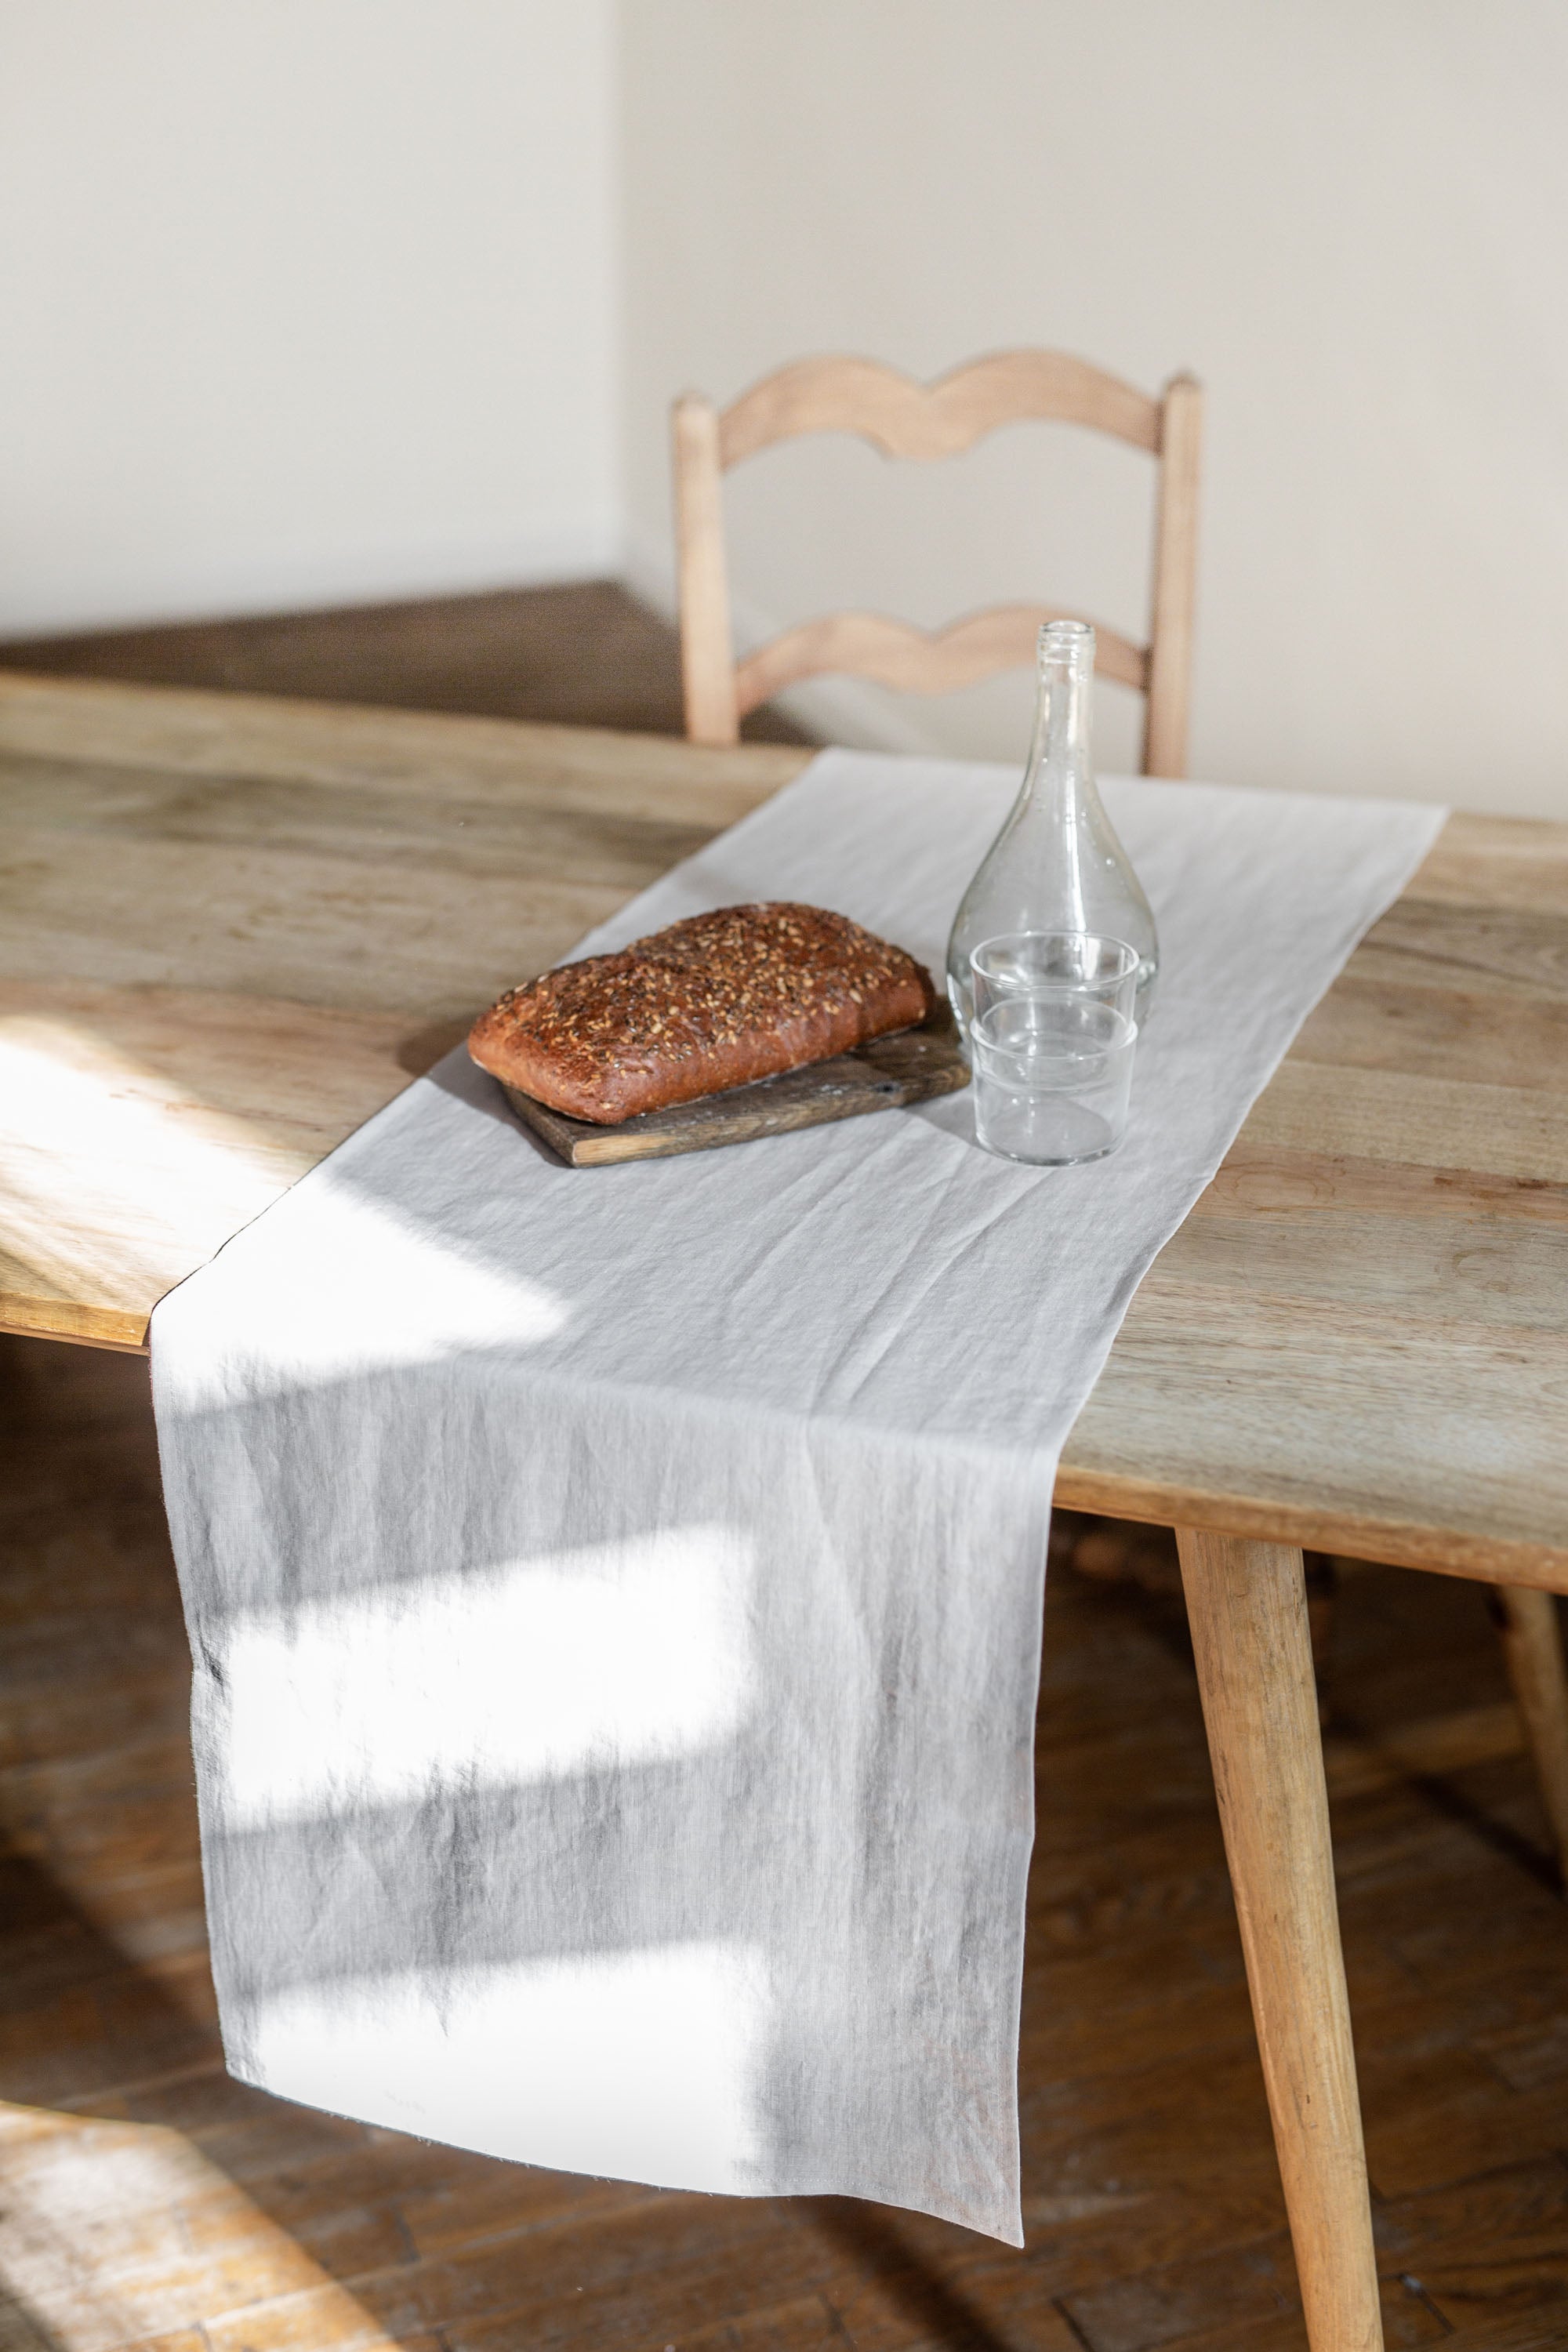 Load of Bread on Dinner Table With Cream Linen Table Runner By AmourlInen